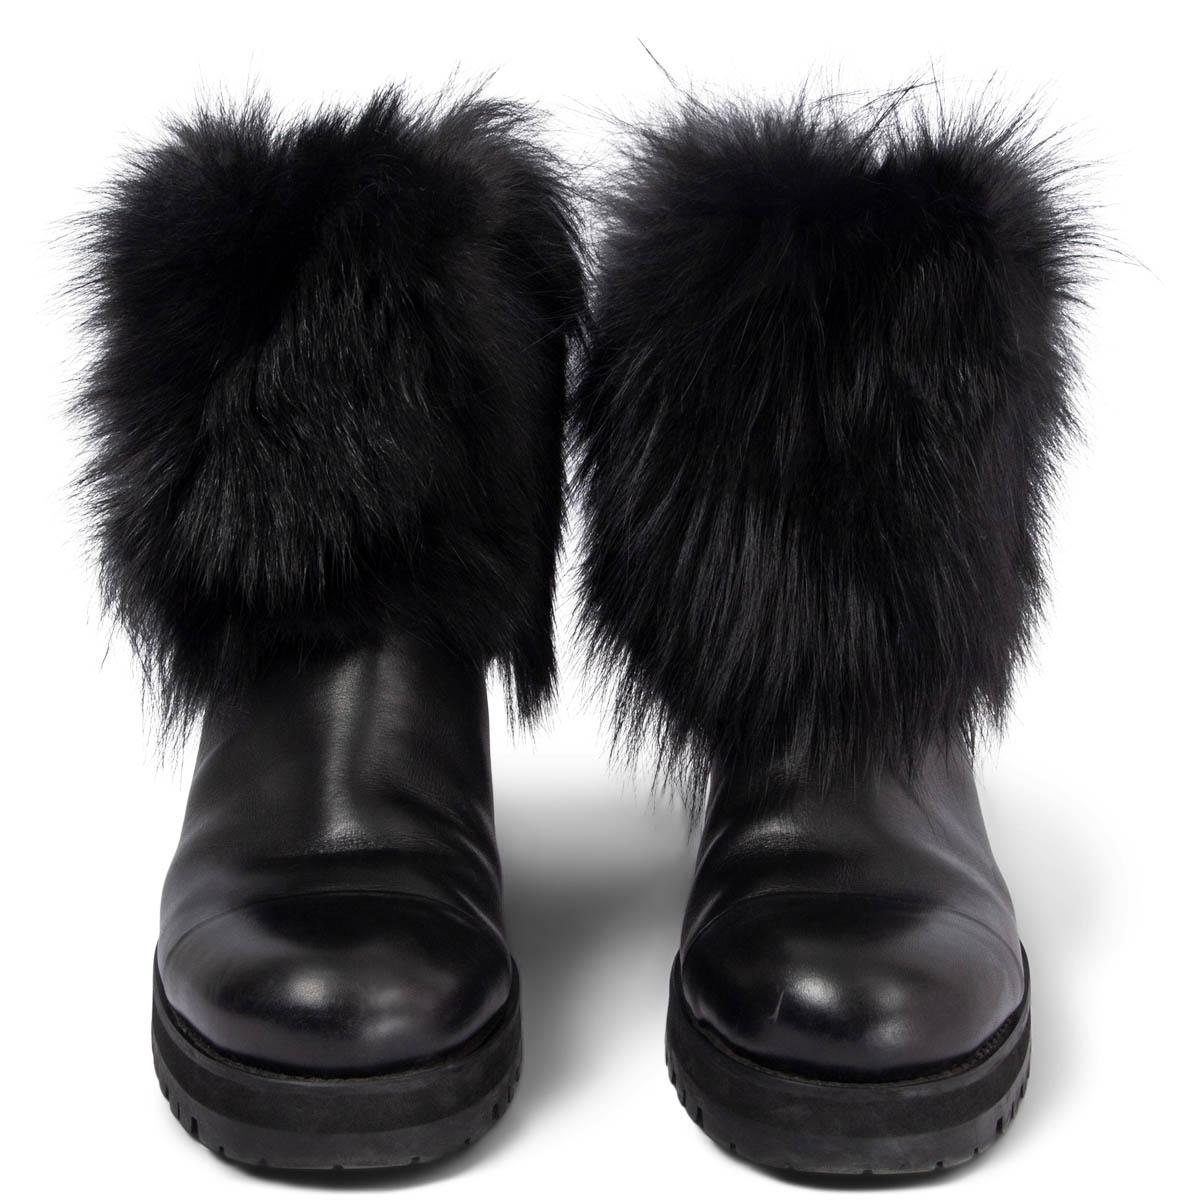 100% authentic Jimmy Choo Dana ankle-boots in black smooth calfskin with black fur trim and white rabbit fur lining. Set on a chunky rubber sole. Have been worn and are in excellent condition. 

Measurements
Imprinted Size	38
Shoe Size	38
Inside